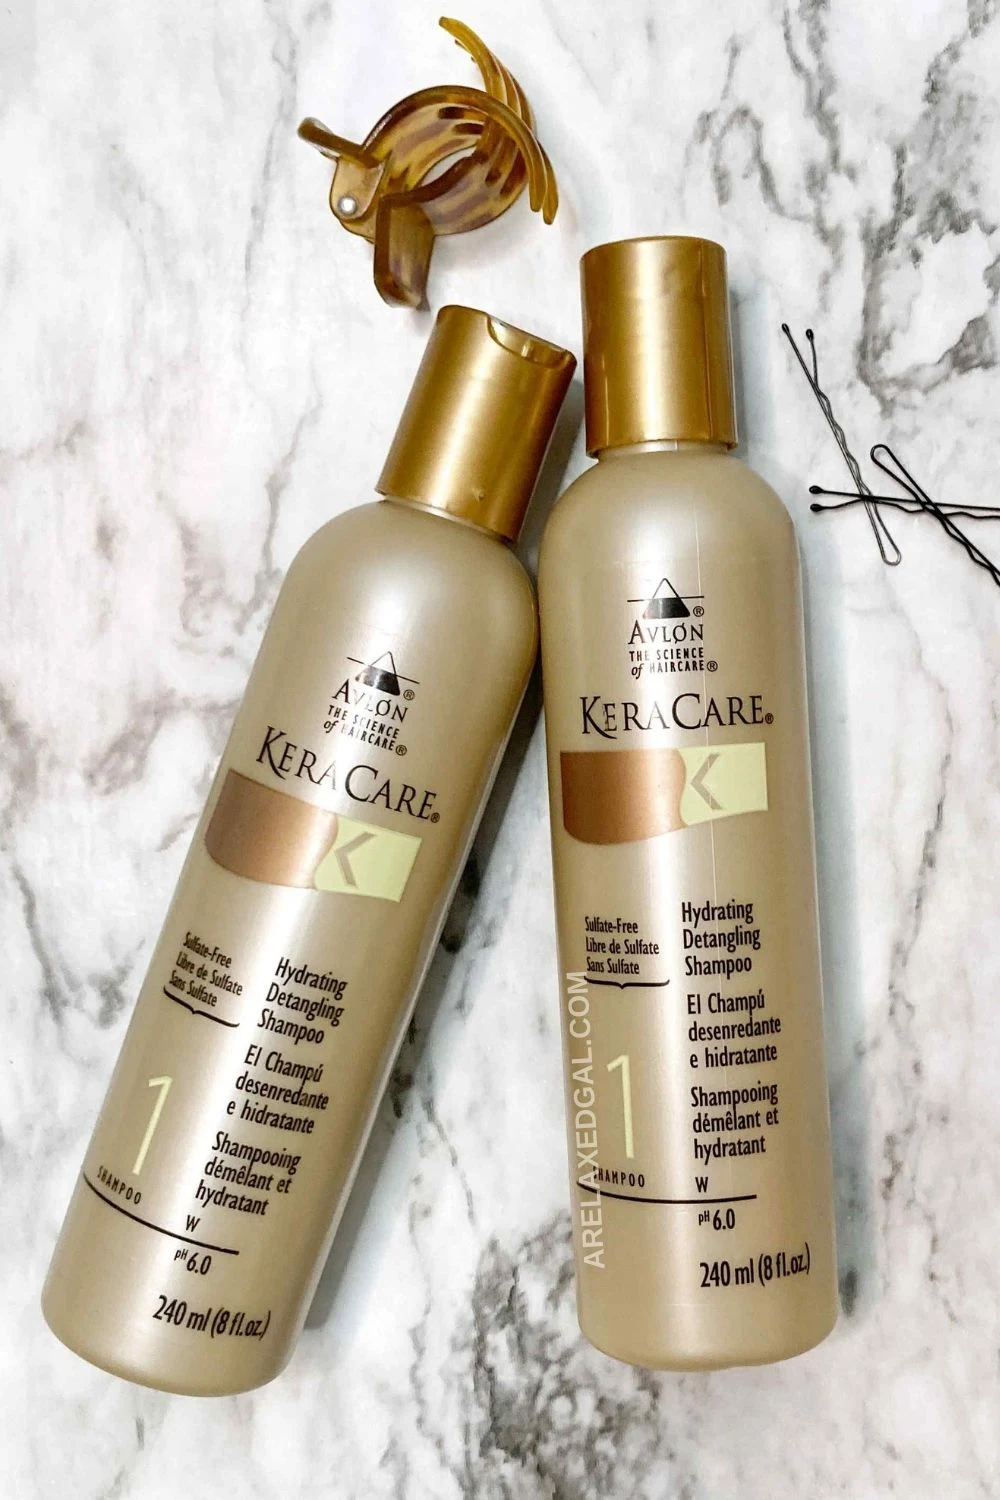 Two Keracare Hydrating Detangling shampoo bottles on a marble background.